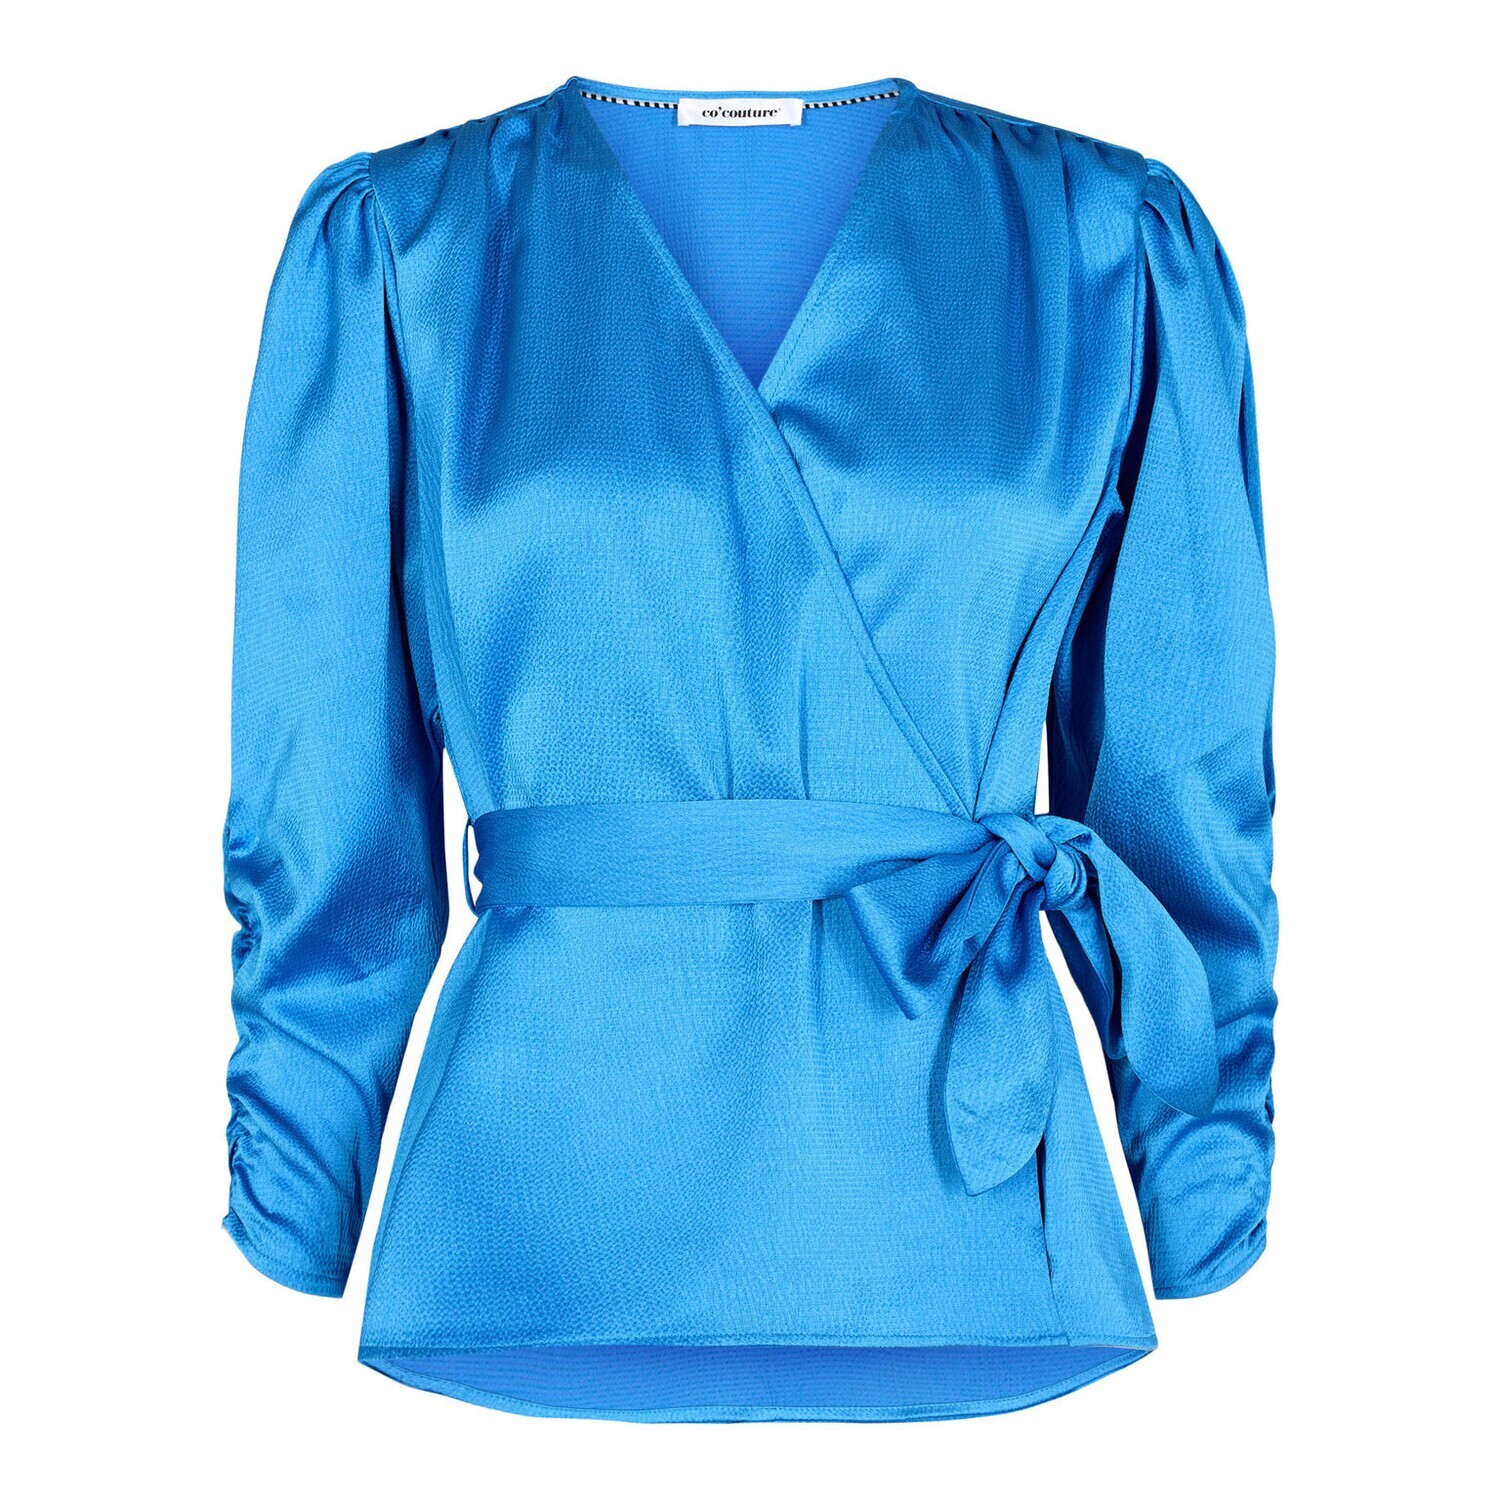 CoCouture Mira Wrap Blouse